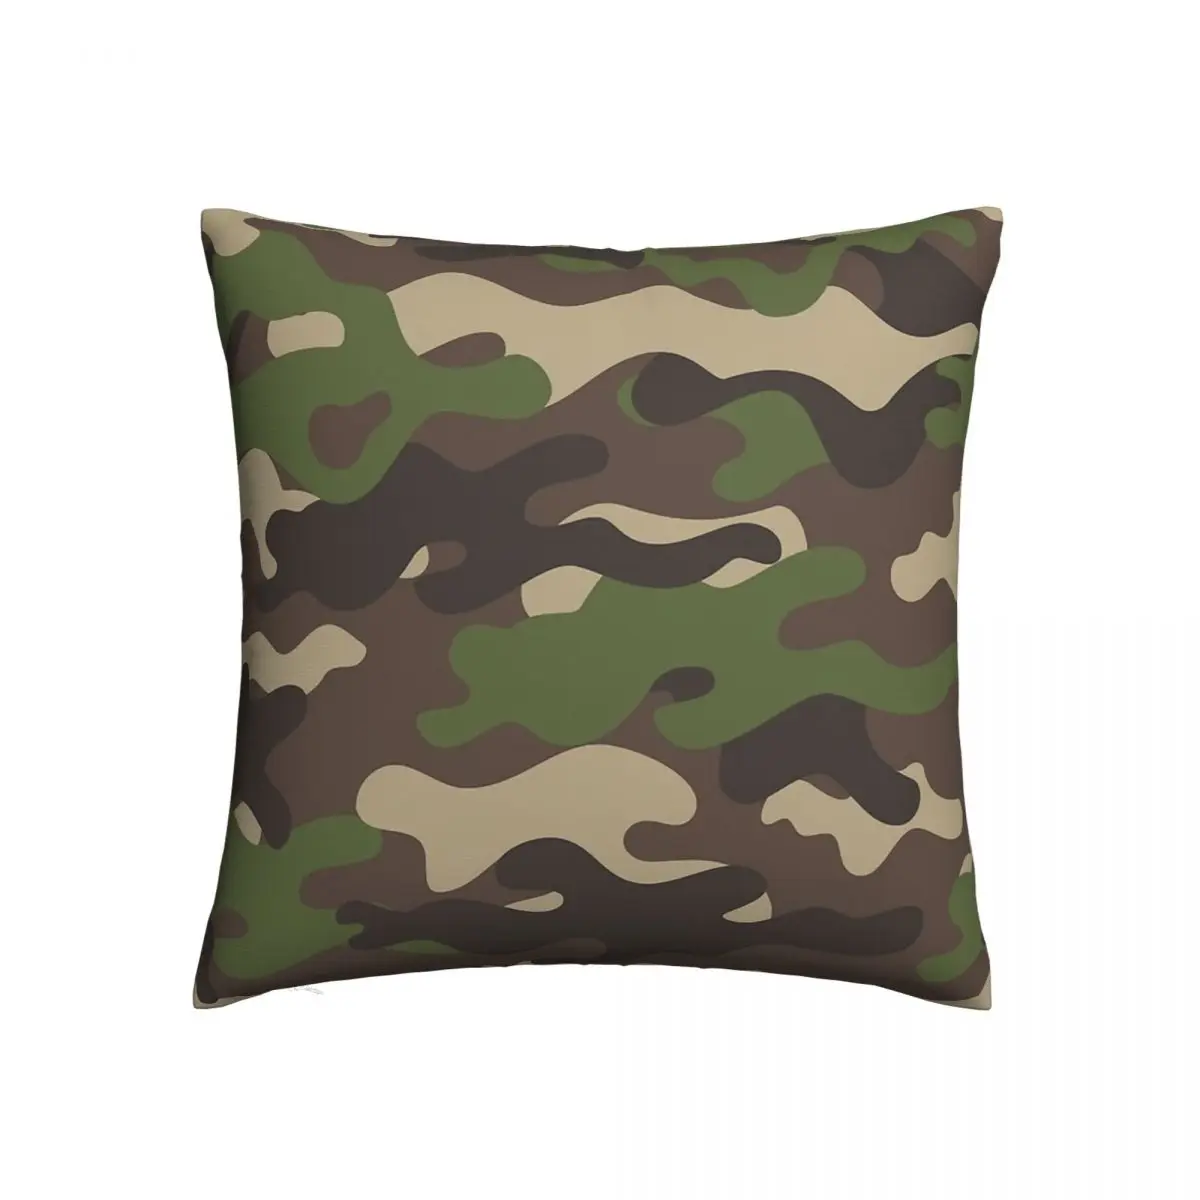 

Poster Hug Pillowcase Camouflage Backpack Cushion Home DIY Printed Chair Coussin Covers Decorative